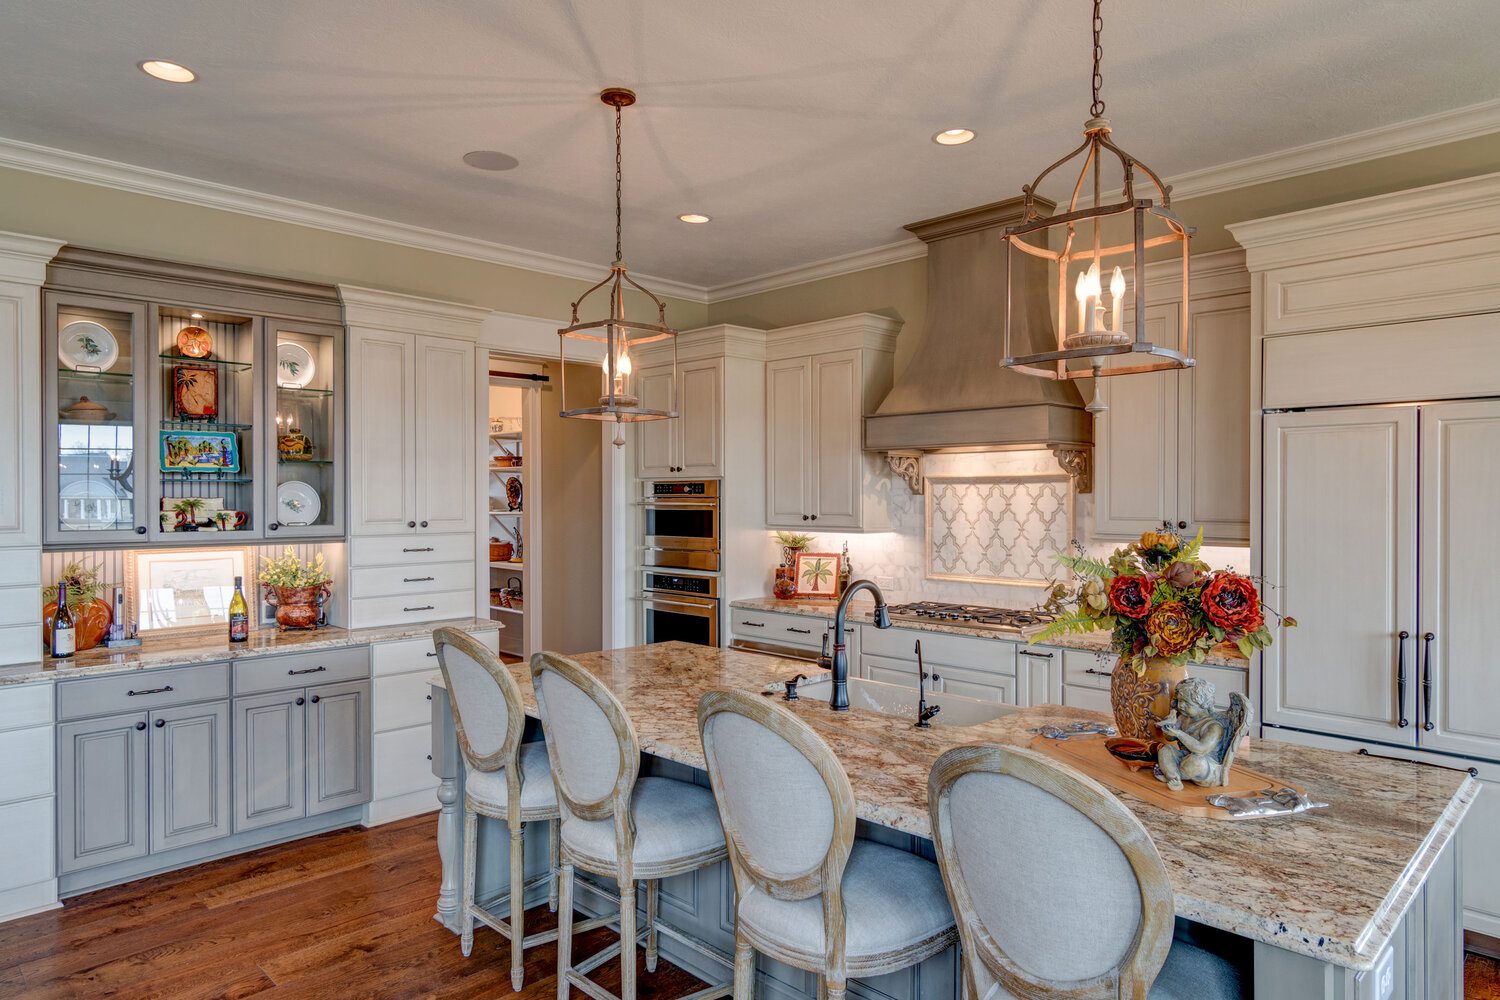 A spacious kitchen featuring a center island and bar stools, perfect for gatherings.